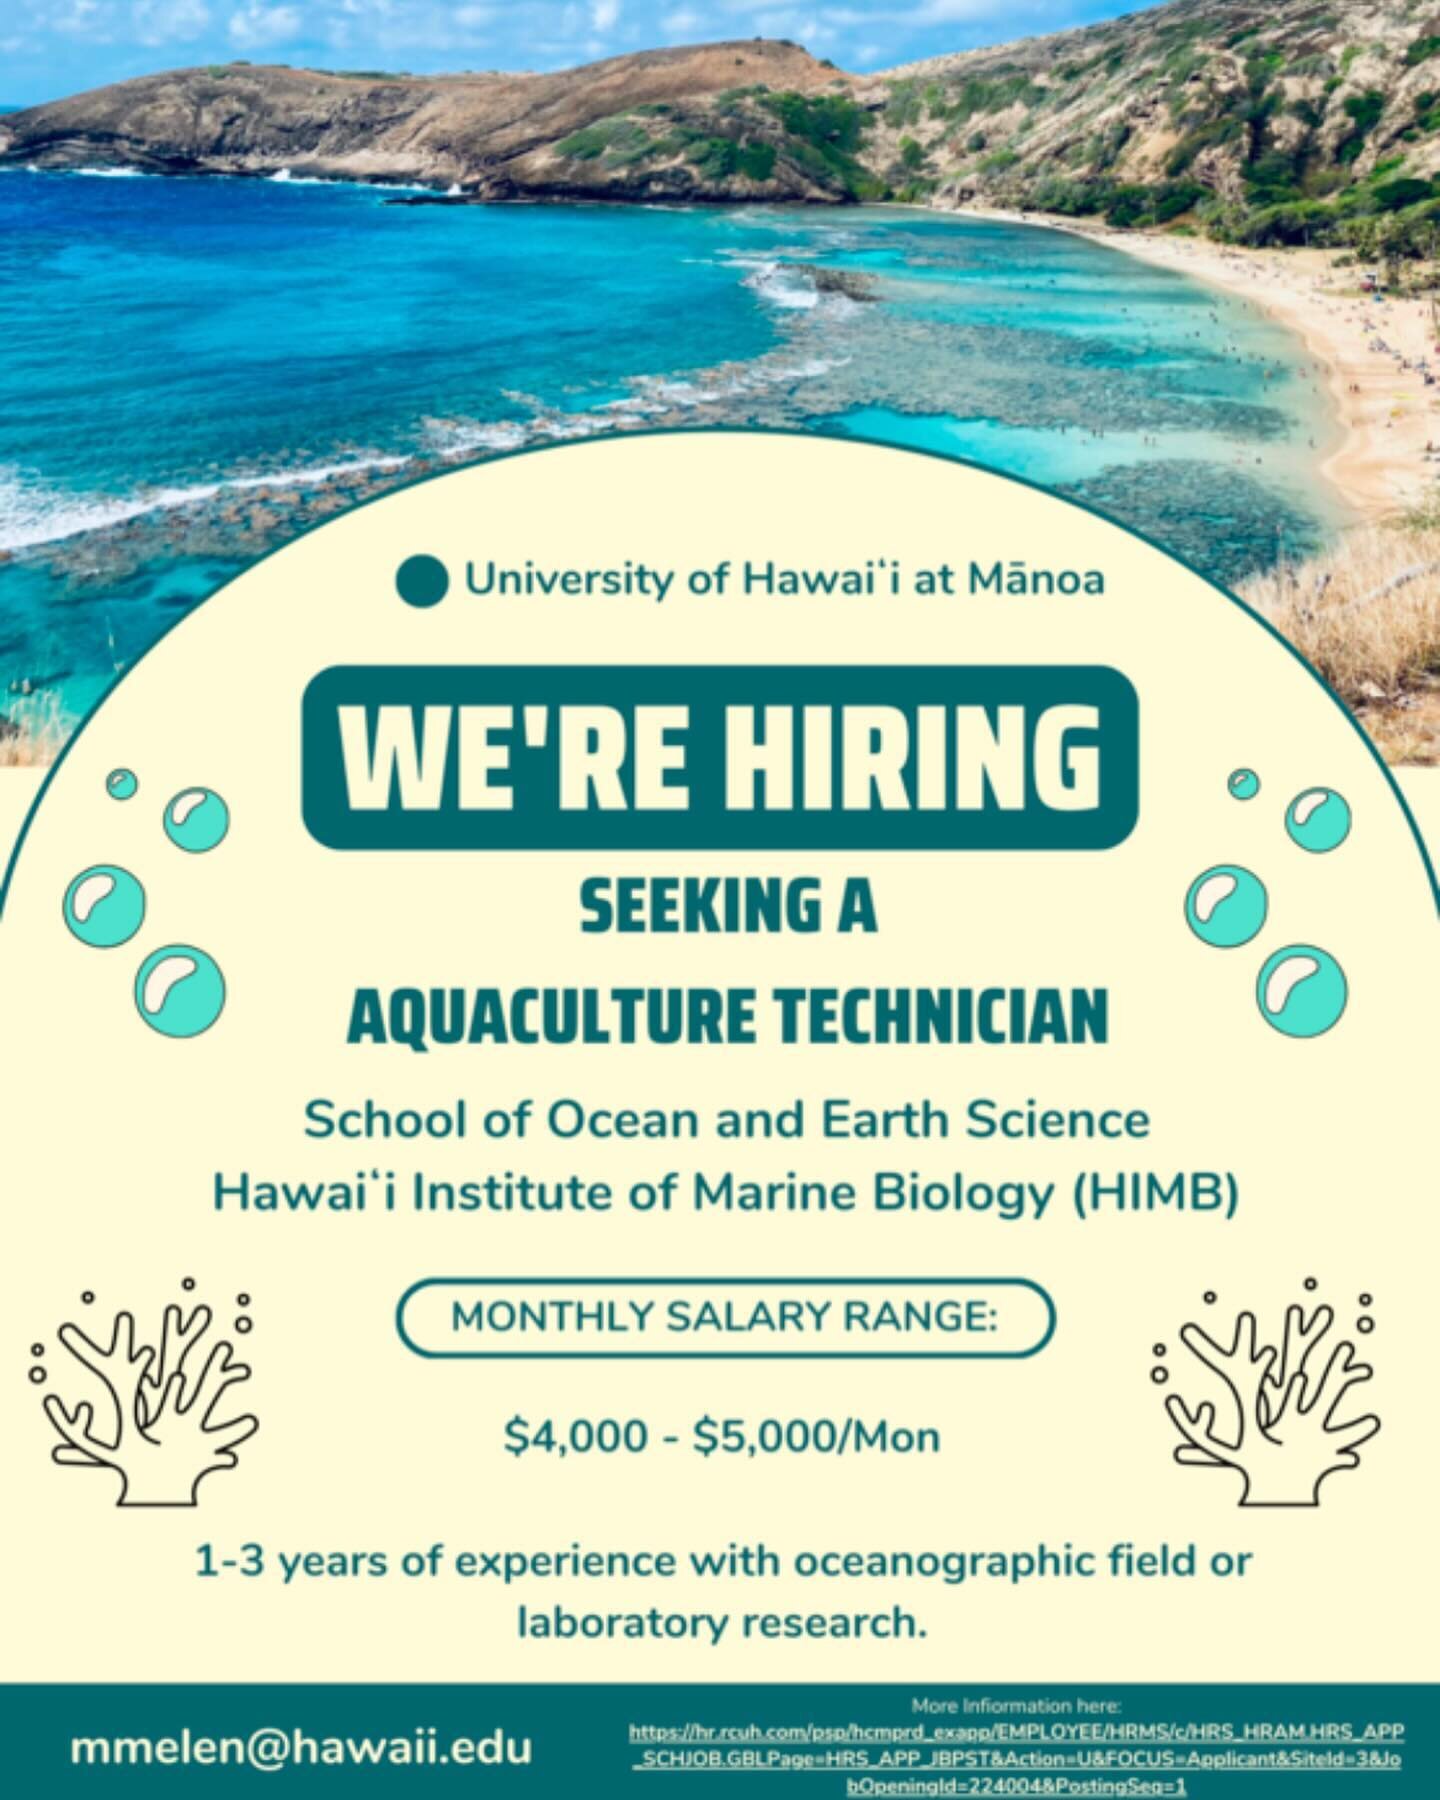 Exciting news!🤩 UH Manoa is on the lookout for an Aquaculture Tech. 🌊 Ready to seize this amazing opportunity? 

Apply through the link below! ⬇️ 

https://hr.rcuh.com/psp/hcmprd_exapp/EMPLOYEE/HRMS/c/HRS_HRAM.HRS_APP_SCHJOB.GBL?Page=HRS_APP_JBPST&